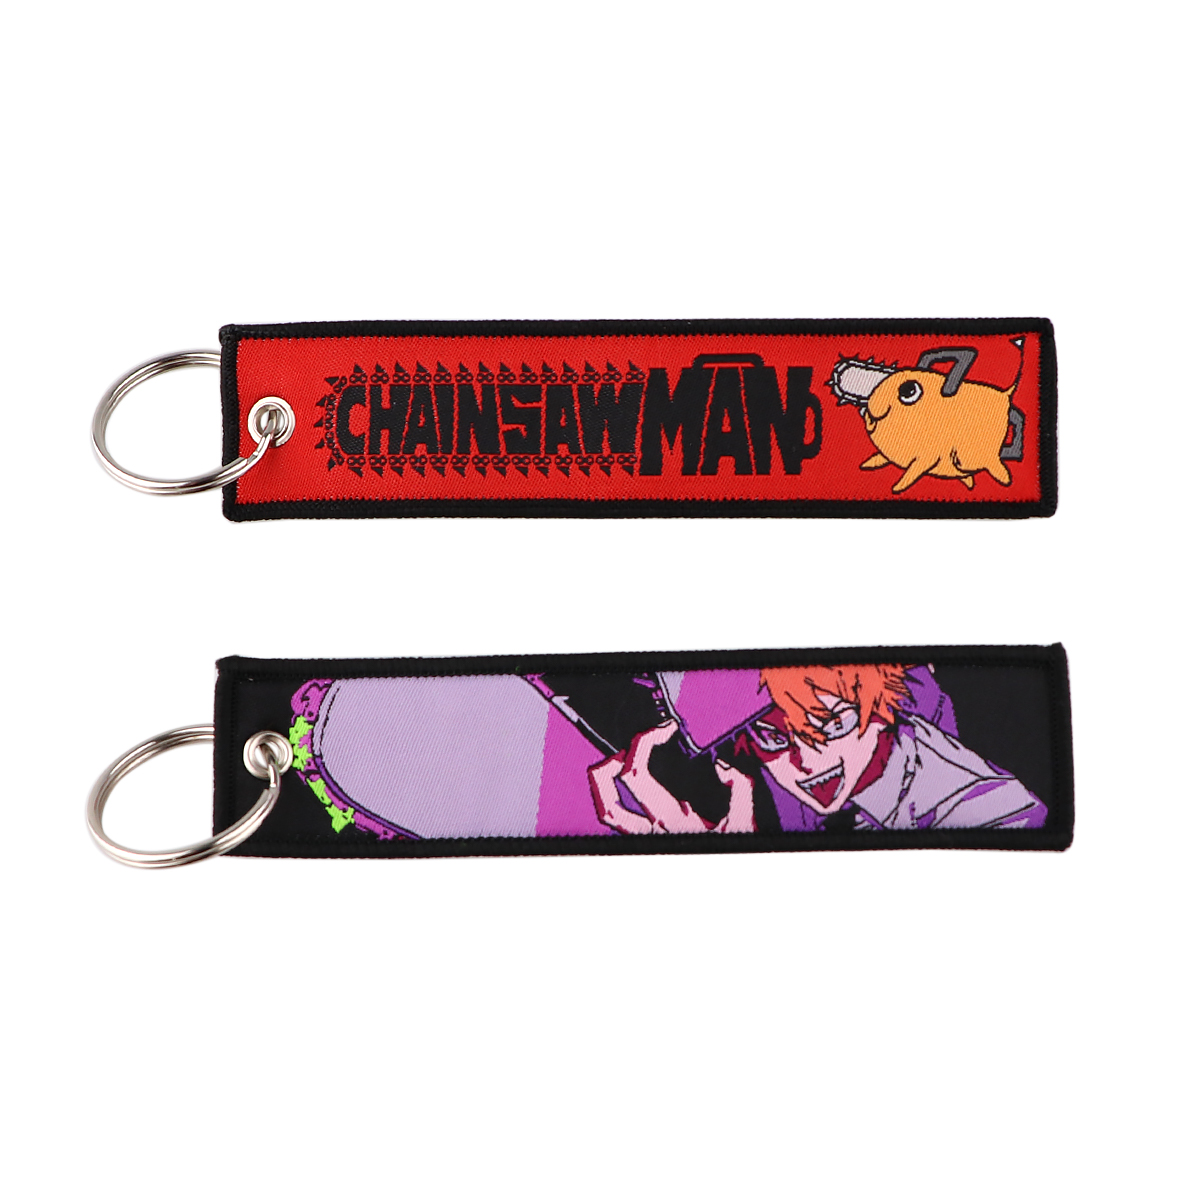 Chainsaw Man – Different Characters Themed Cool Keychains (7 Designs) Keychains